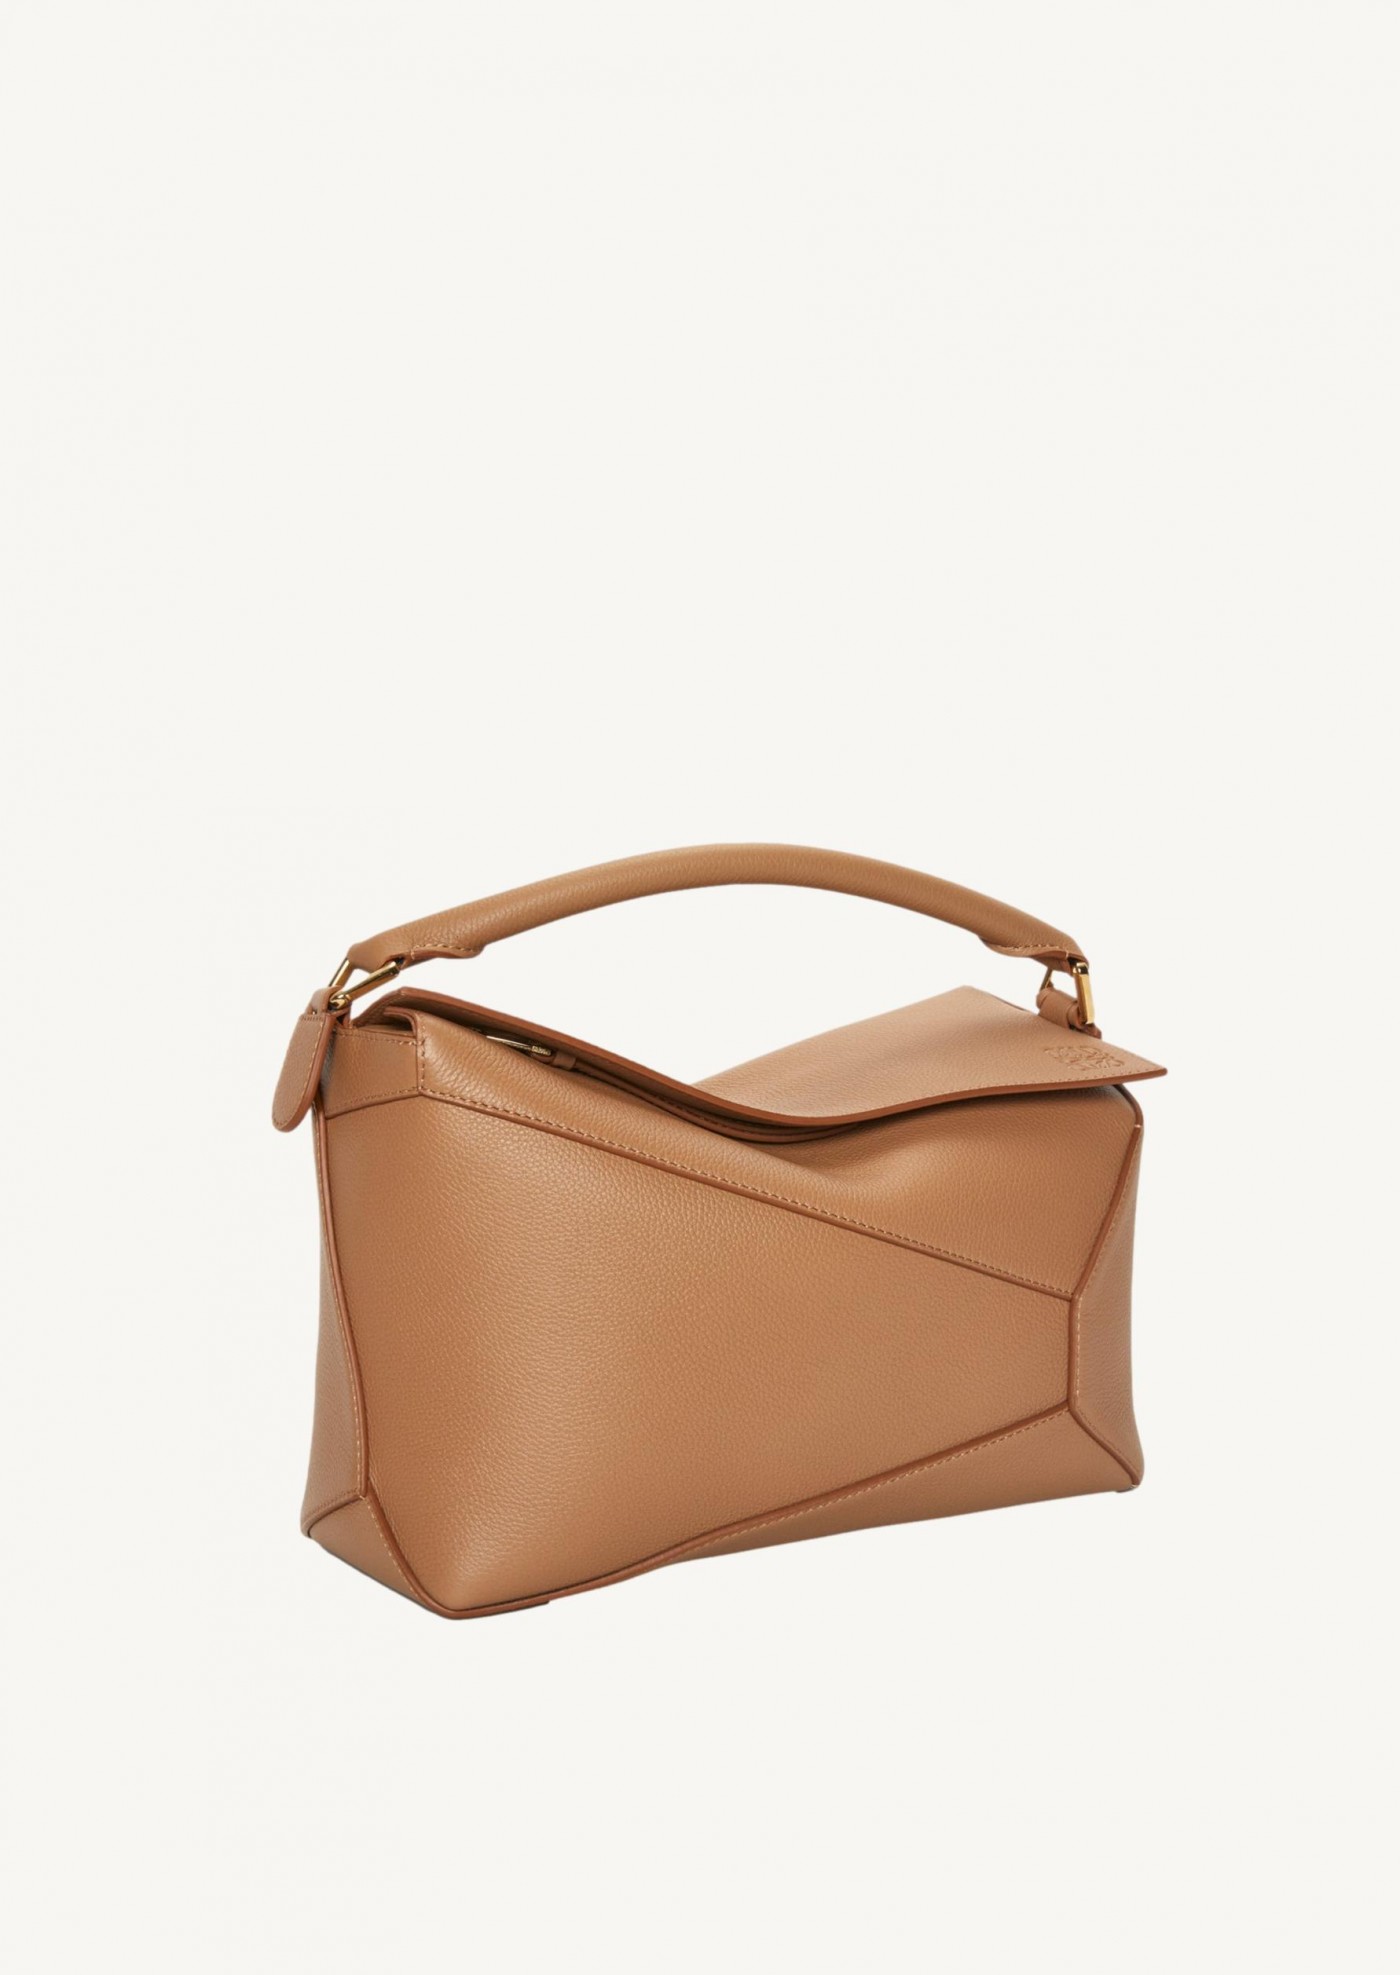 Puzzle bag in soft grained calfskin toffee